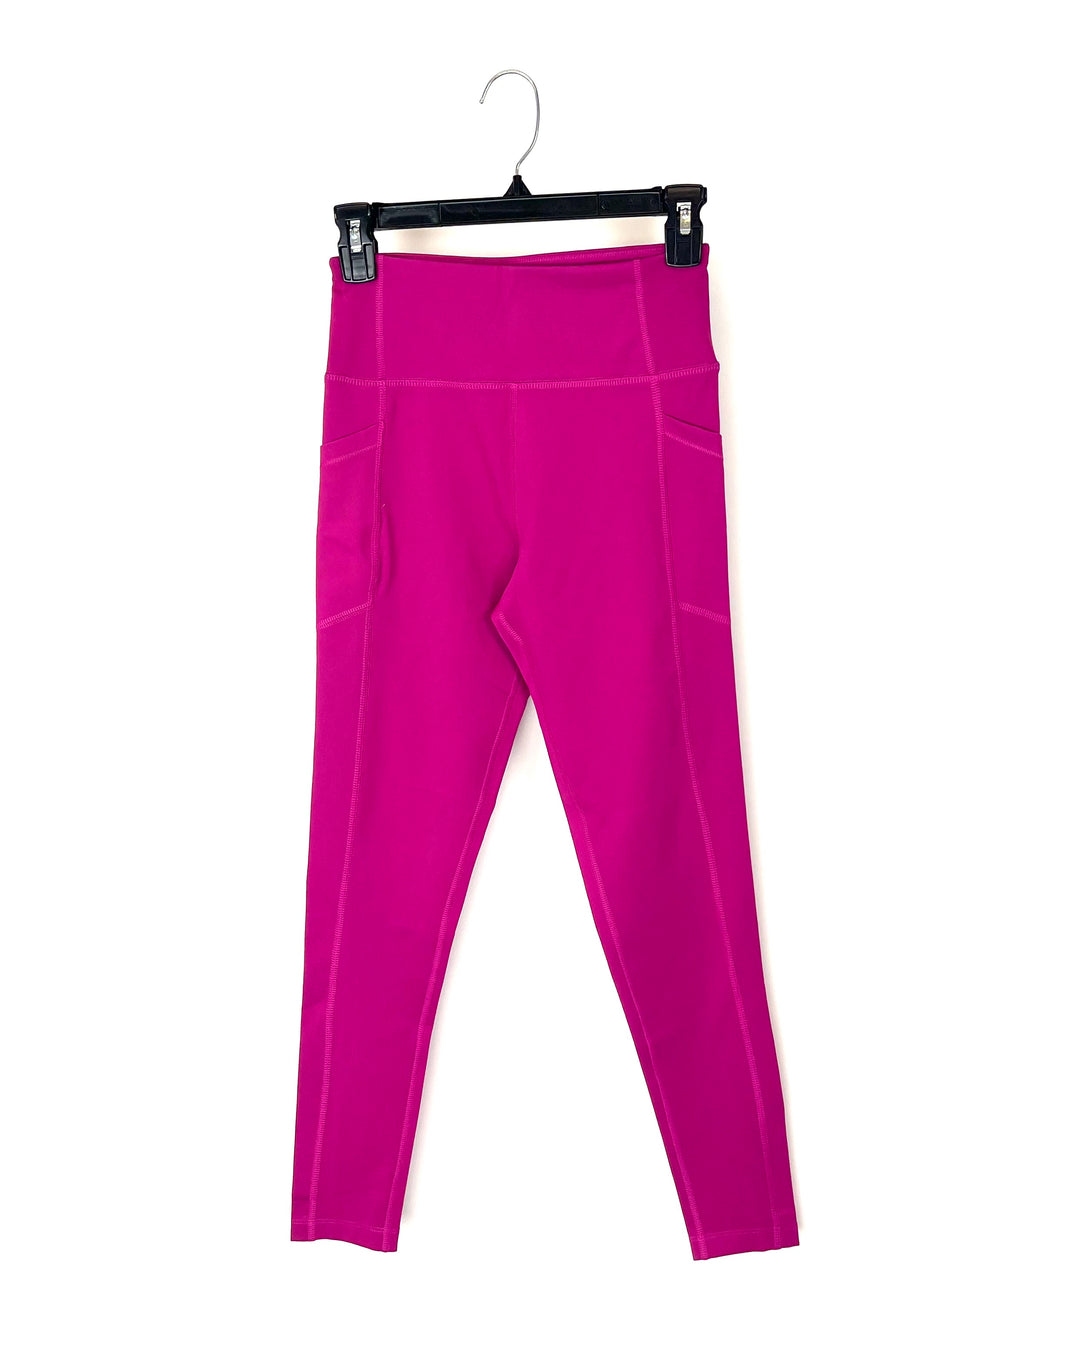 Magenta Activewear Leggings With Pockets - Small